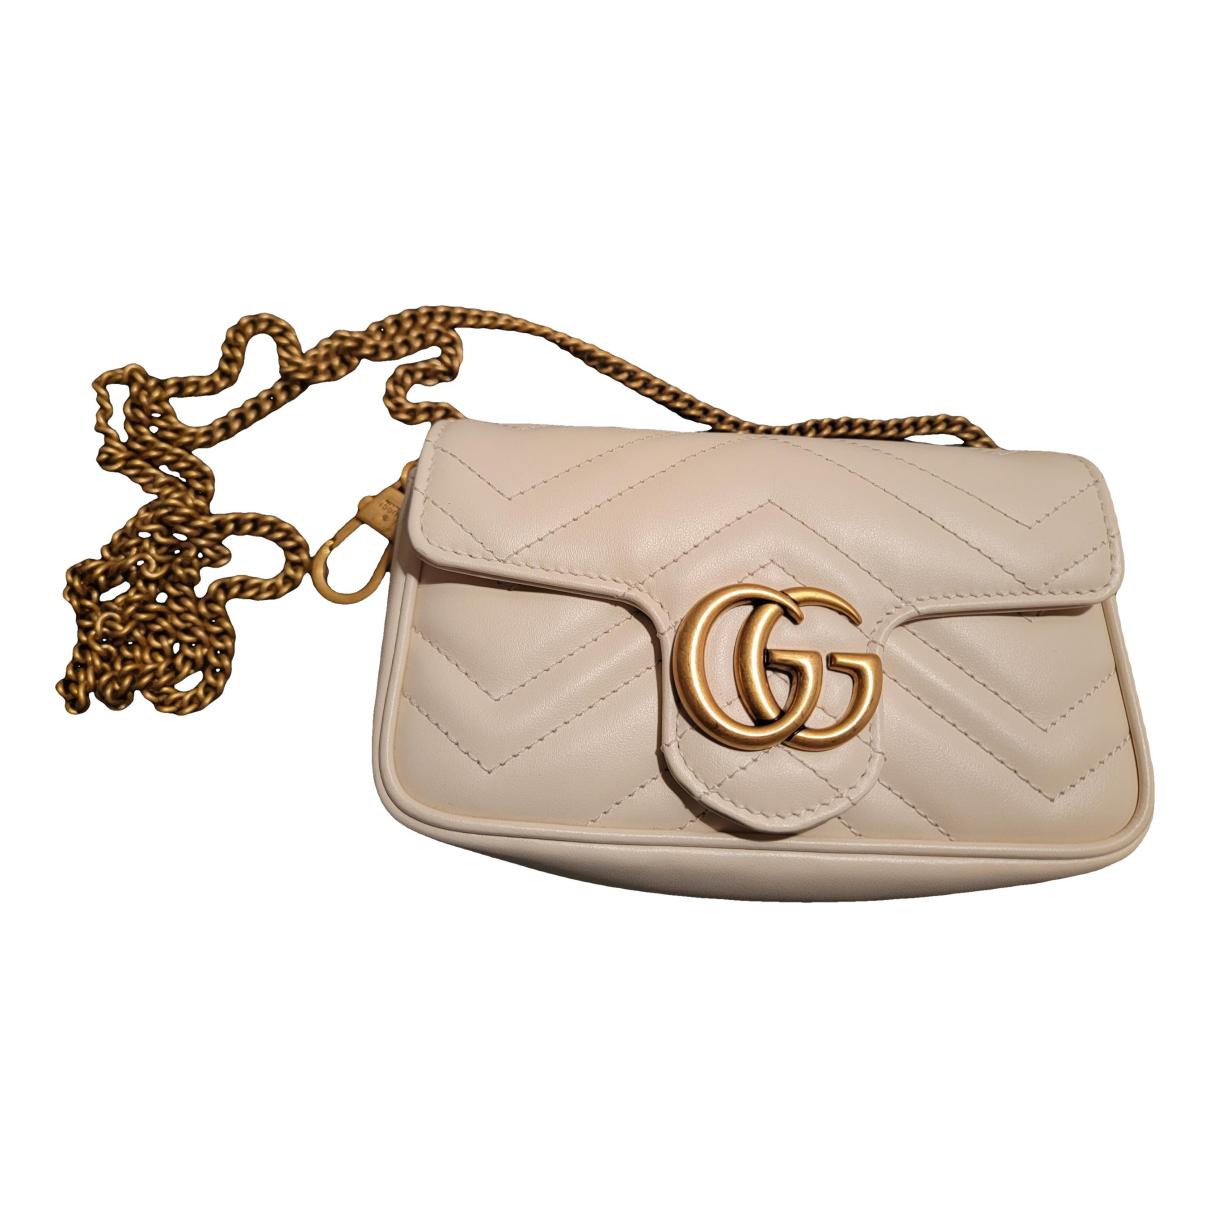 Gg marmont flap leather crossbody bag Gucci White in Leather - 27285598